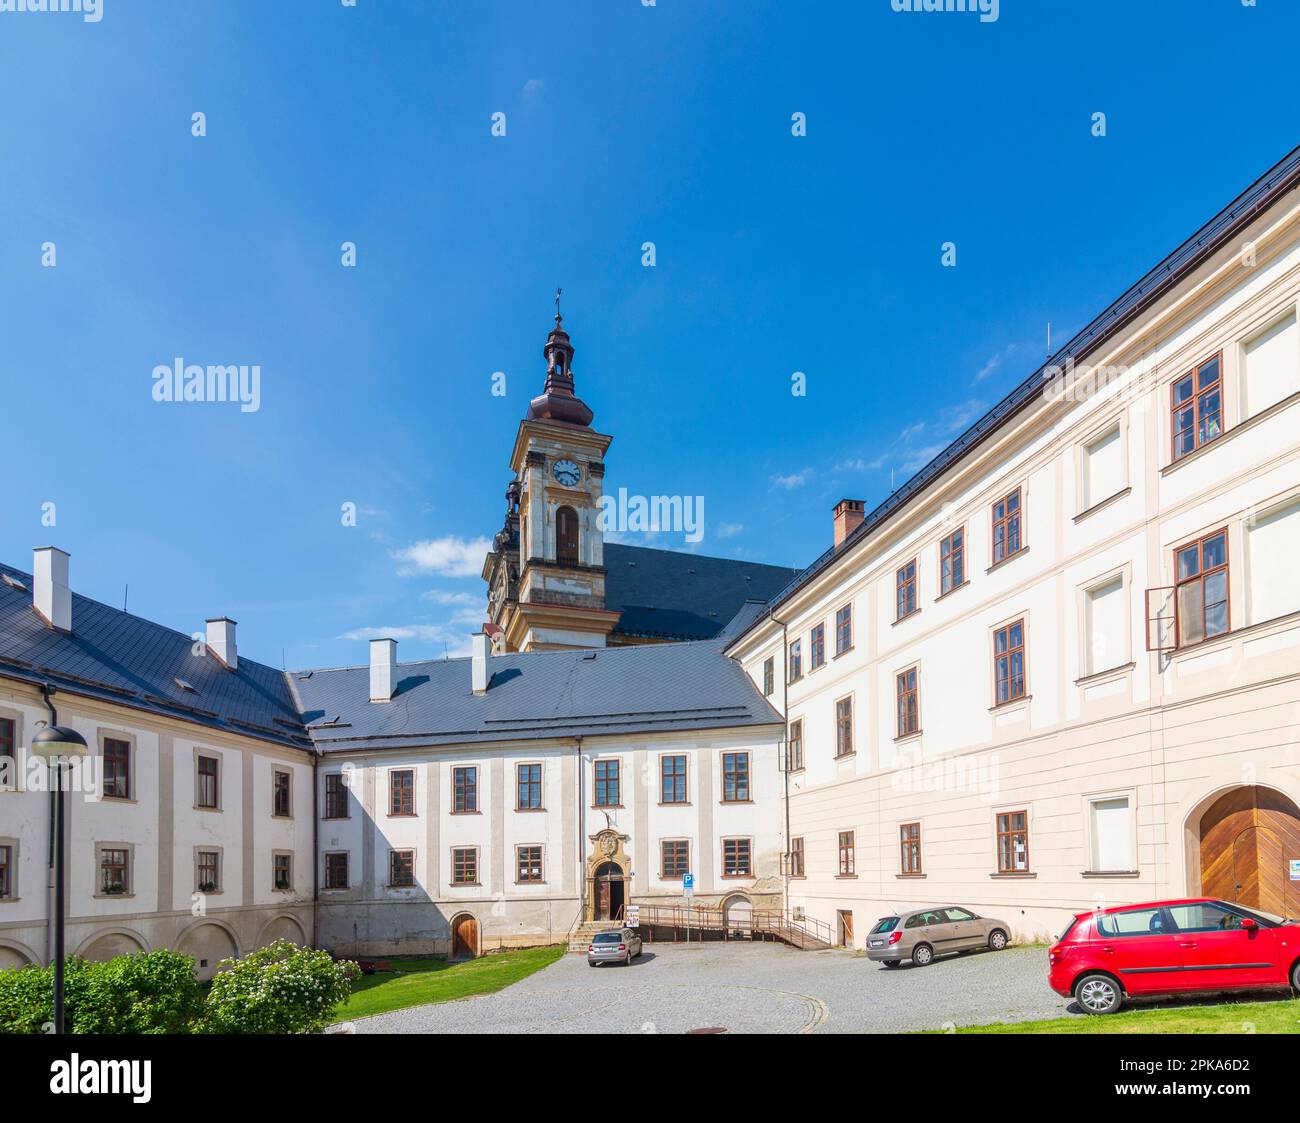 Sternberk (Sternberg), former Augustinian monastery, today contains museum expositions and exhibition spaces, including the gallery of painter Johann Christoph Handke, Church of the Annunciation in Olomoucky, Olomouc Region (Olmützer Region), Czechia Stock Photo